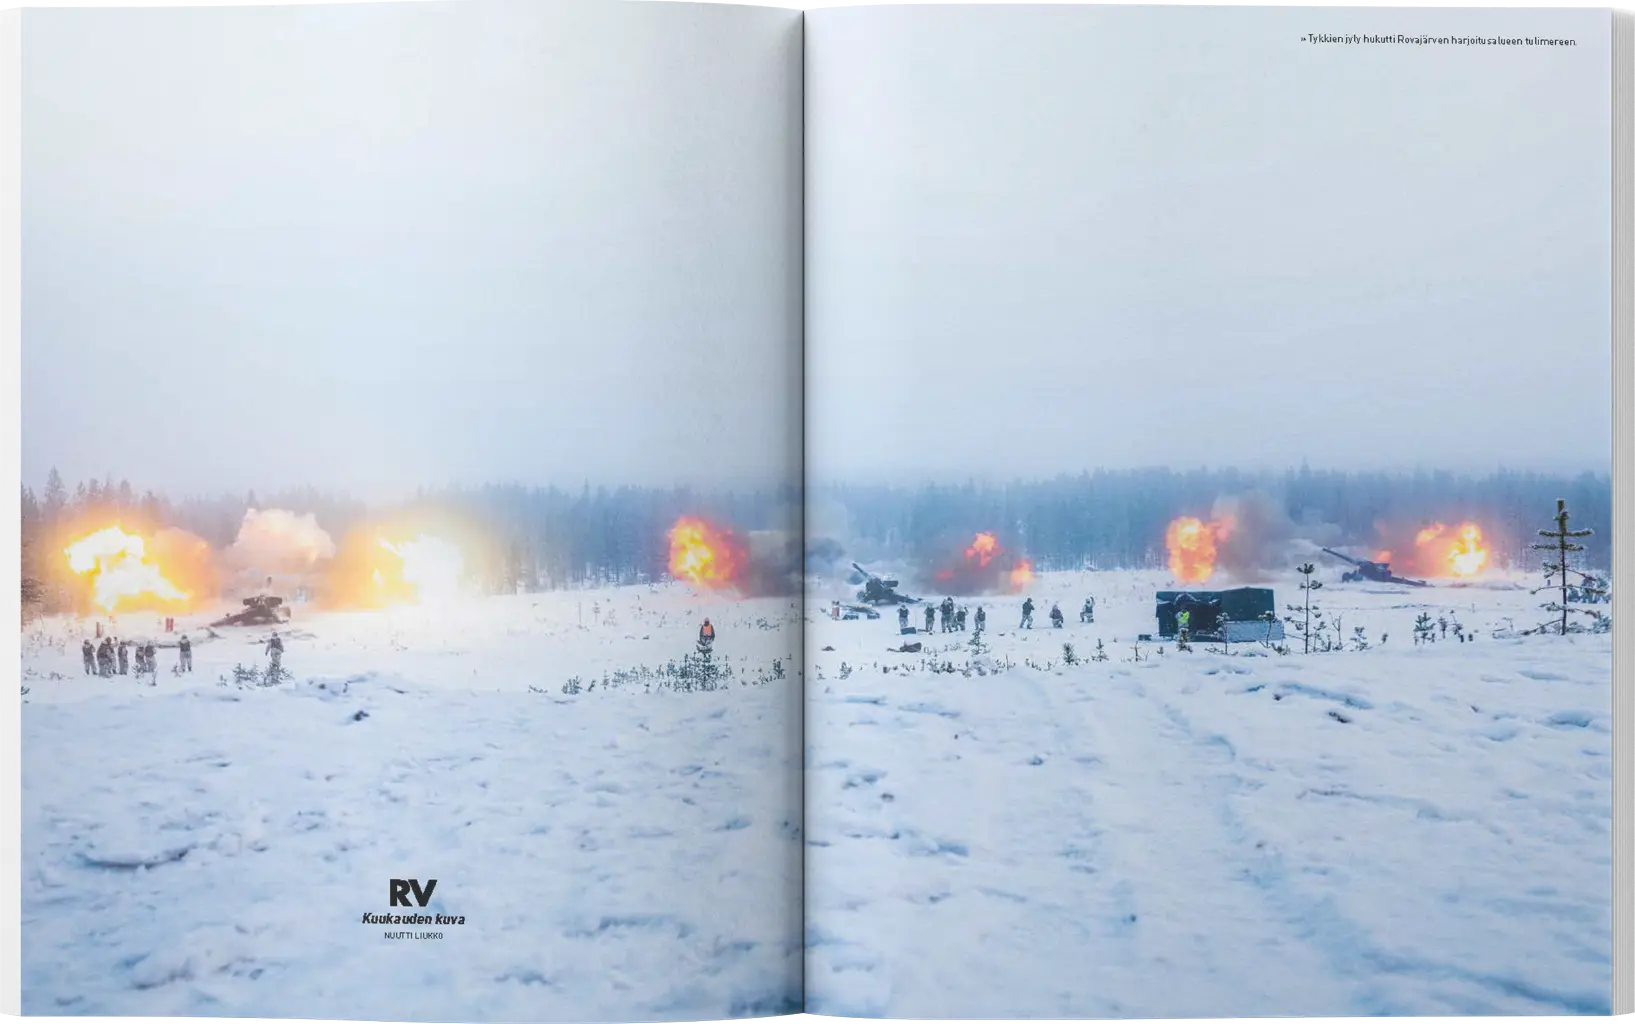 Spread from the 17/20 issue of the Ruotuväki newspaper.